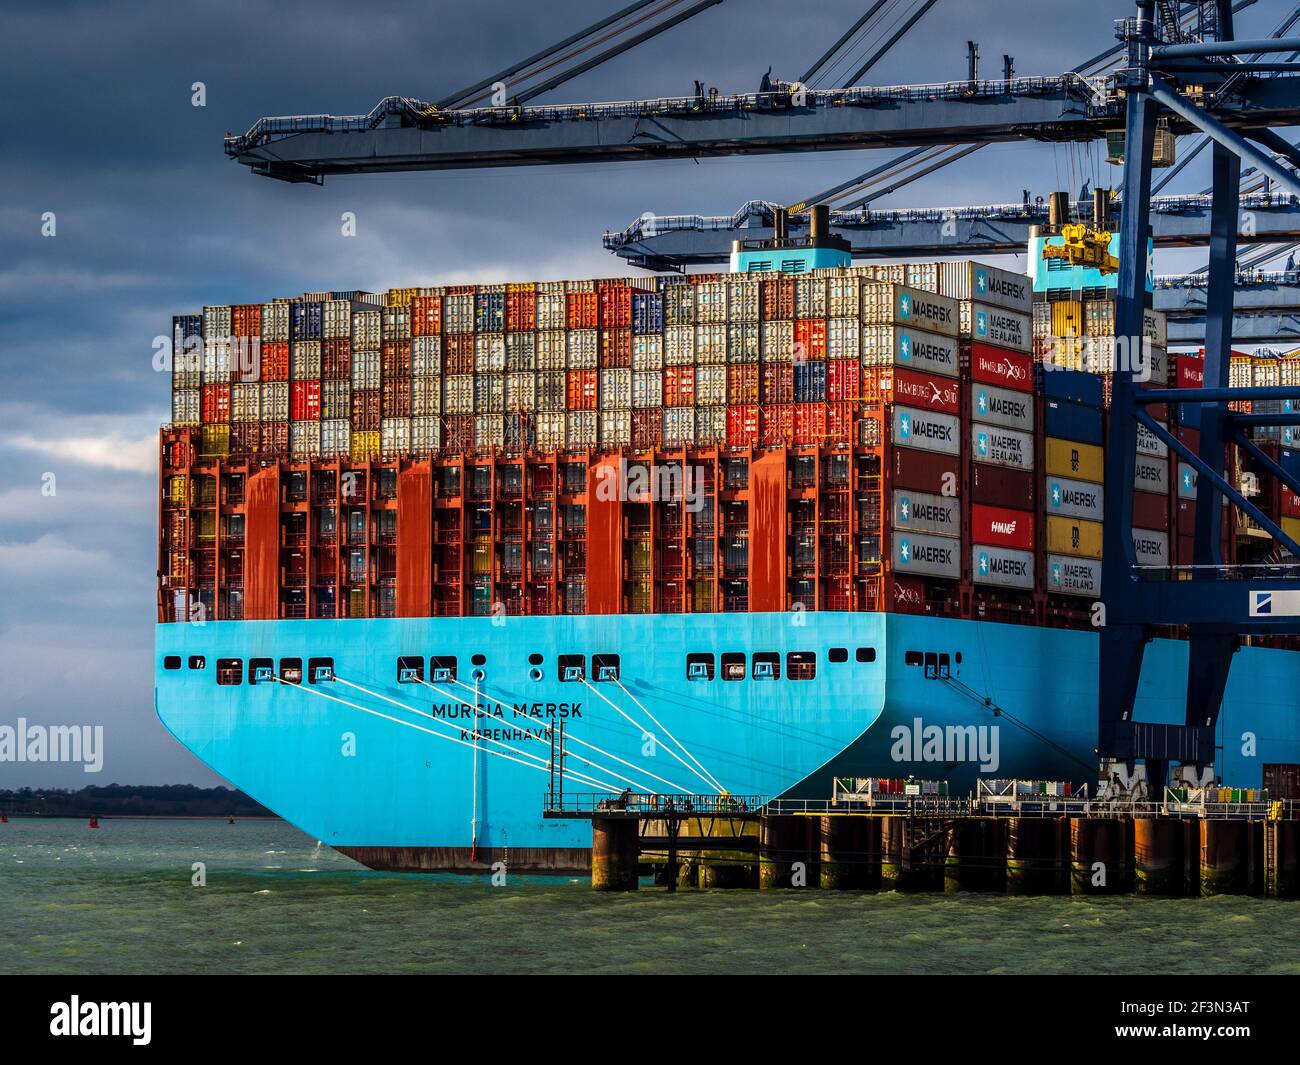 Maersk Line - British Imports - the Maersk Herrera Container Ship docked at Felixstowe Port UK bringing imports from the Far East to the UK and Europe Stock Photo